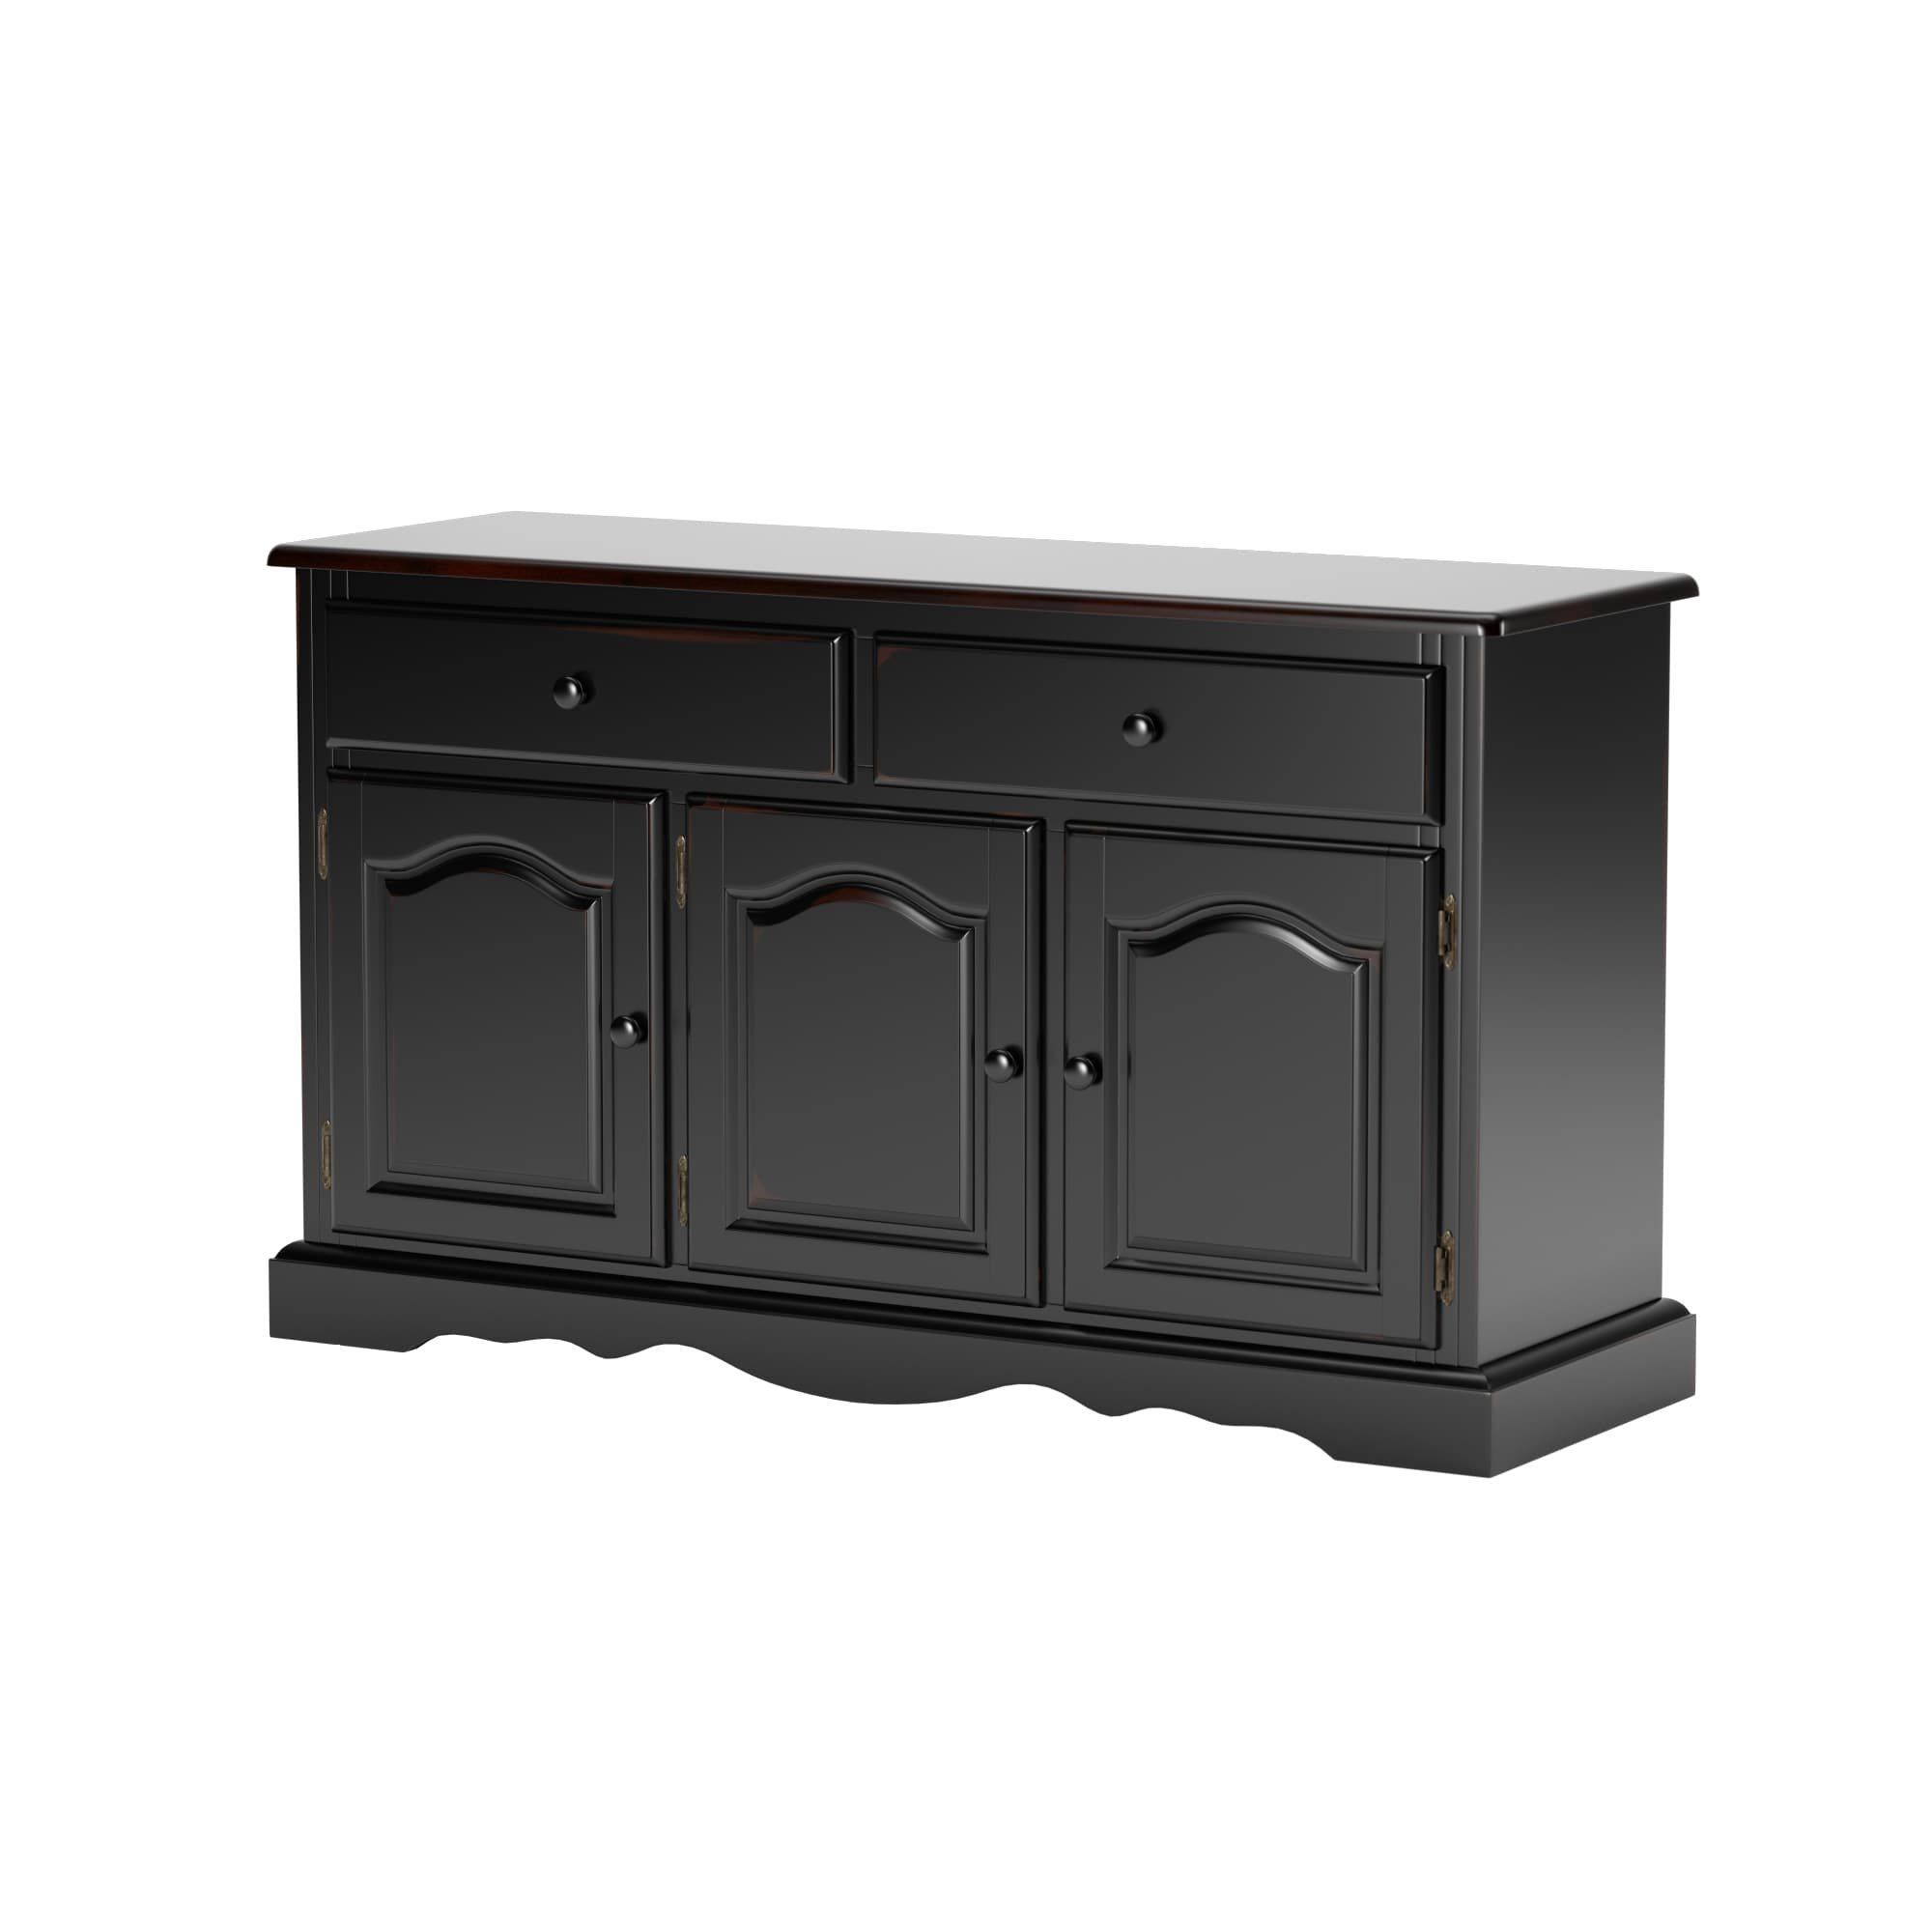 Extra Long Buffet | Wayfair Intended For Current Arminta Wood Sideboards (View 5 of 20)